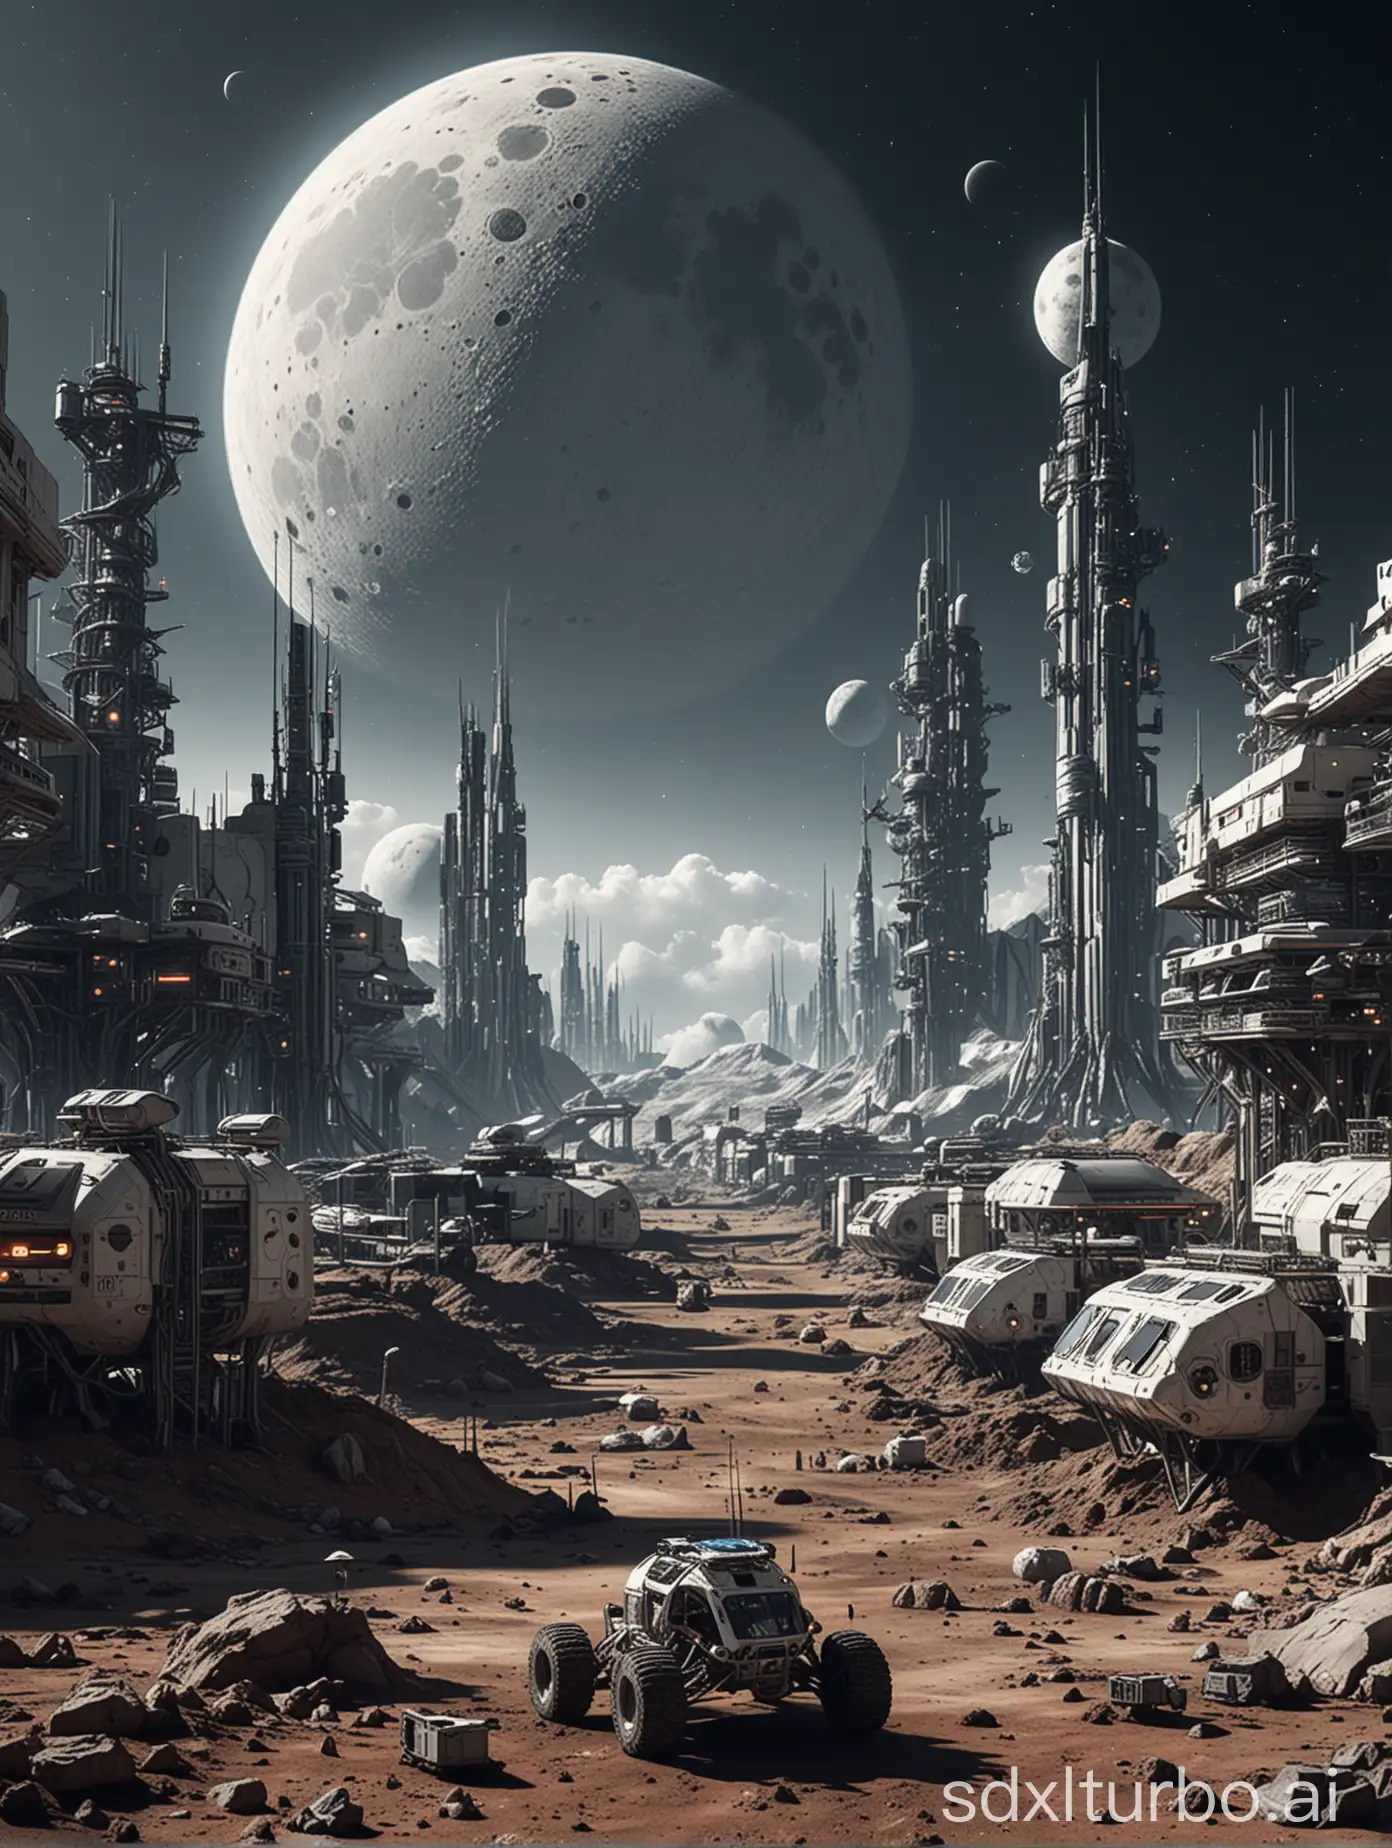 An extraterrestrial big city on the moon, with space station and energy center located in a futuristic moon habitat, accessible by a space elevator, with a moon buggy, The space station and energy center are rendered in a digital illustration style with a focus on the futuristic architecture of the habitat, earth, satellite,cinematic lighting, Unreal Engine, 8k, intricate detail --ar 3:4